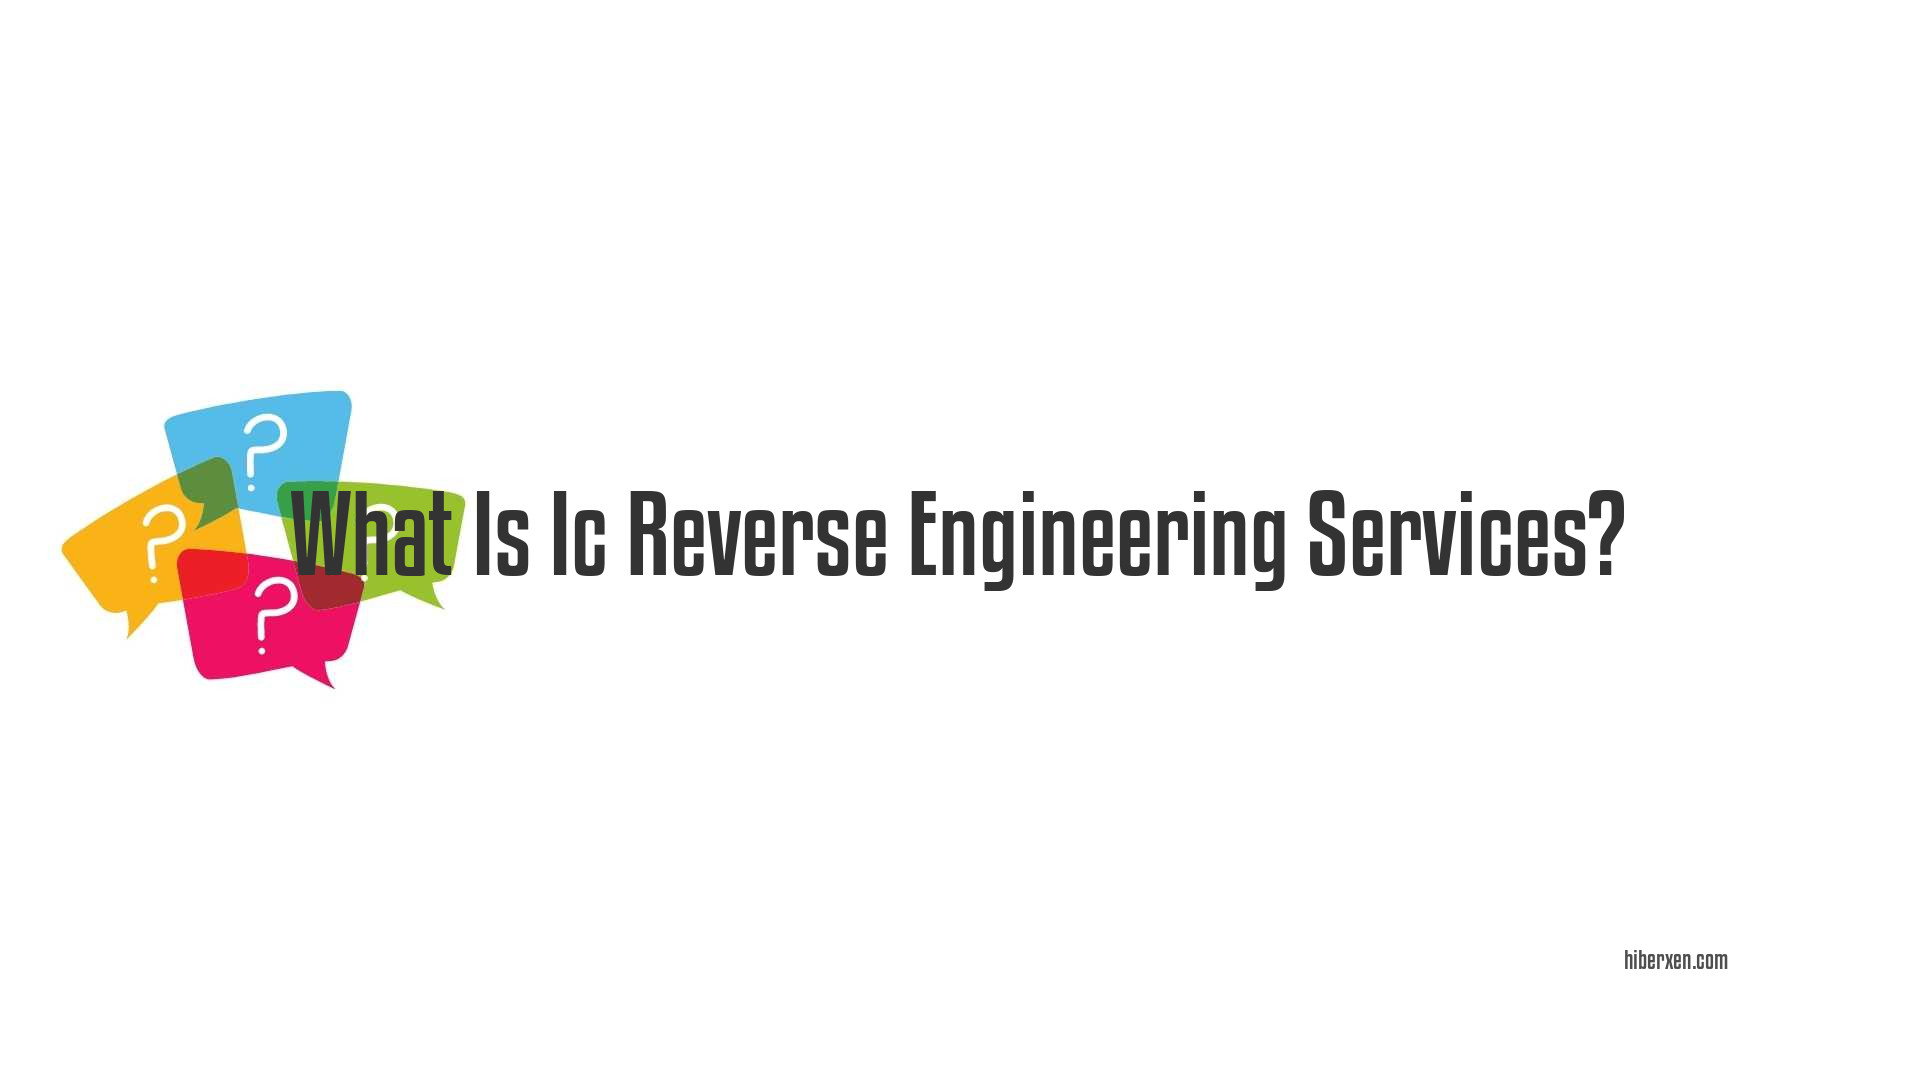 What Is Ic Reverse Engineering Services?